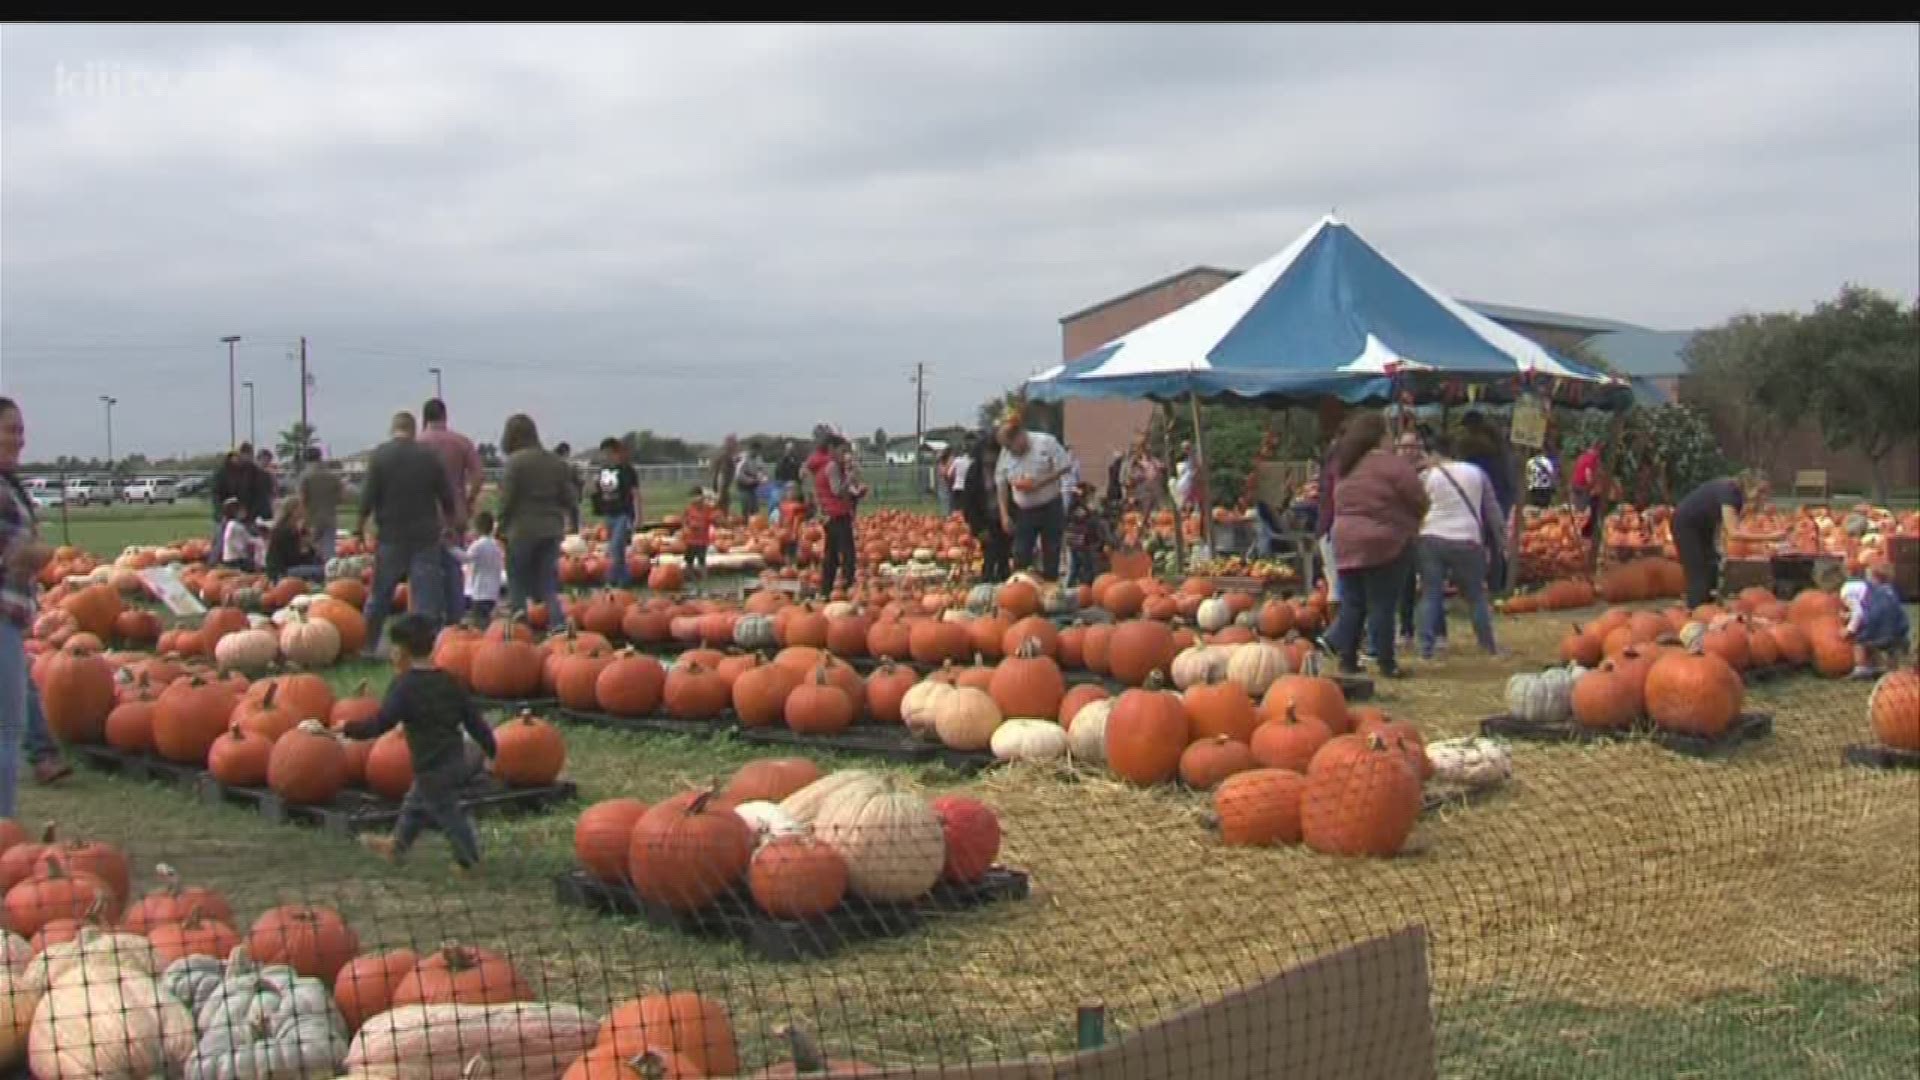 In Corpus Christi pumpkins come from New Mexico because their drier climate in the state makes it easier to plant.